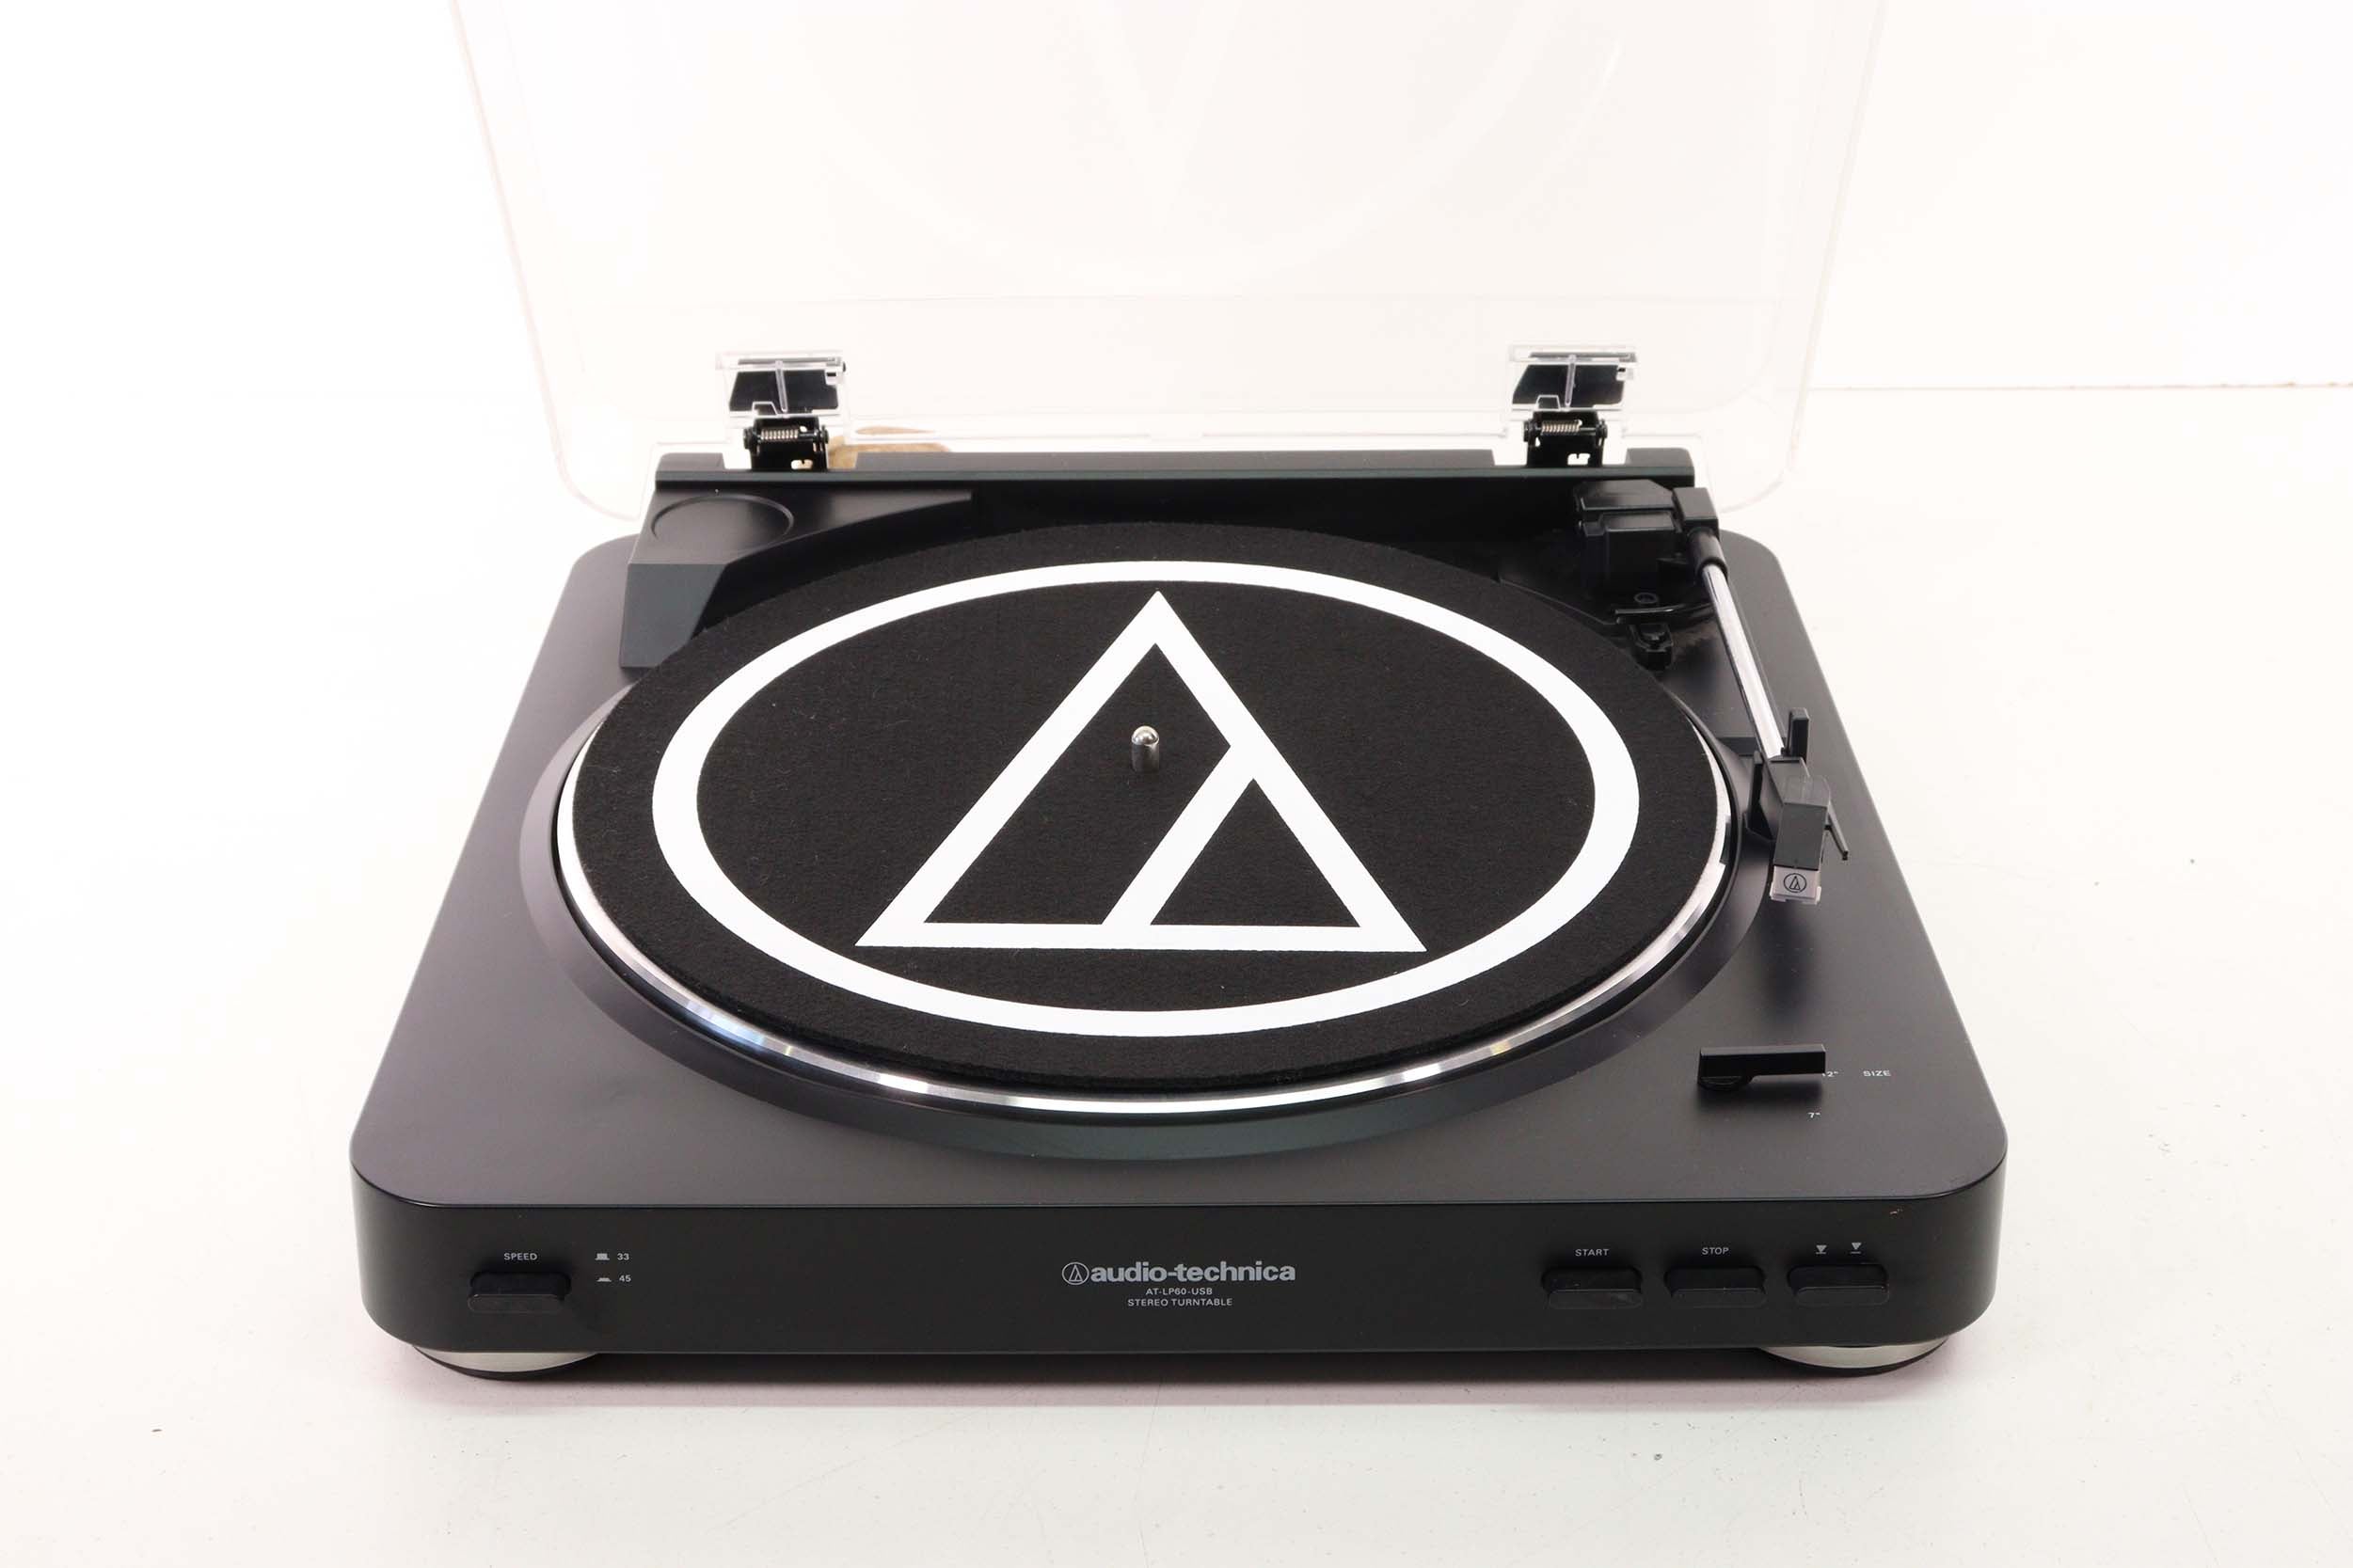 How To Connect Audio-Technica At-Lp60 Turntable To Receiver